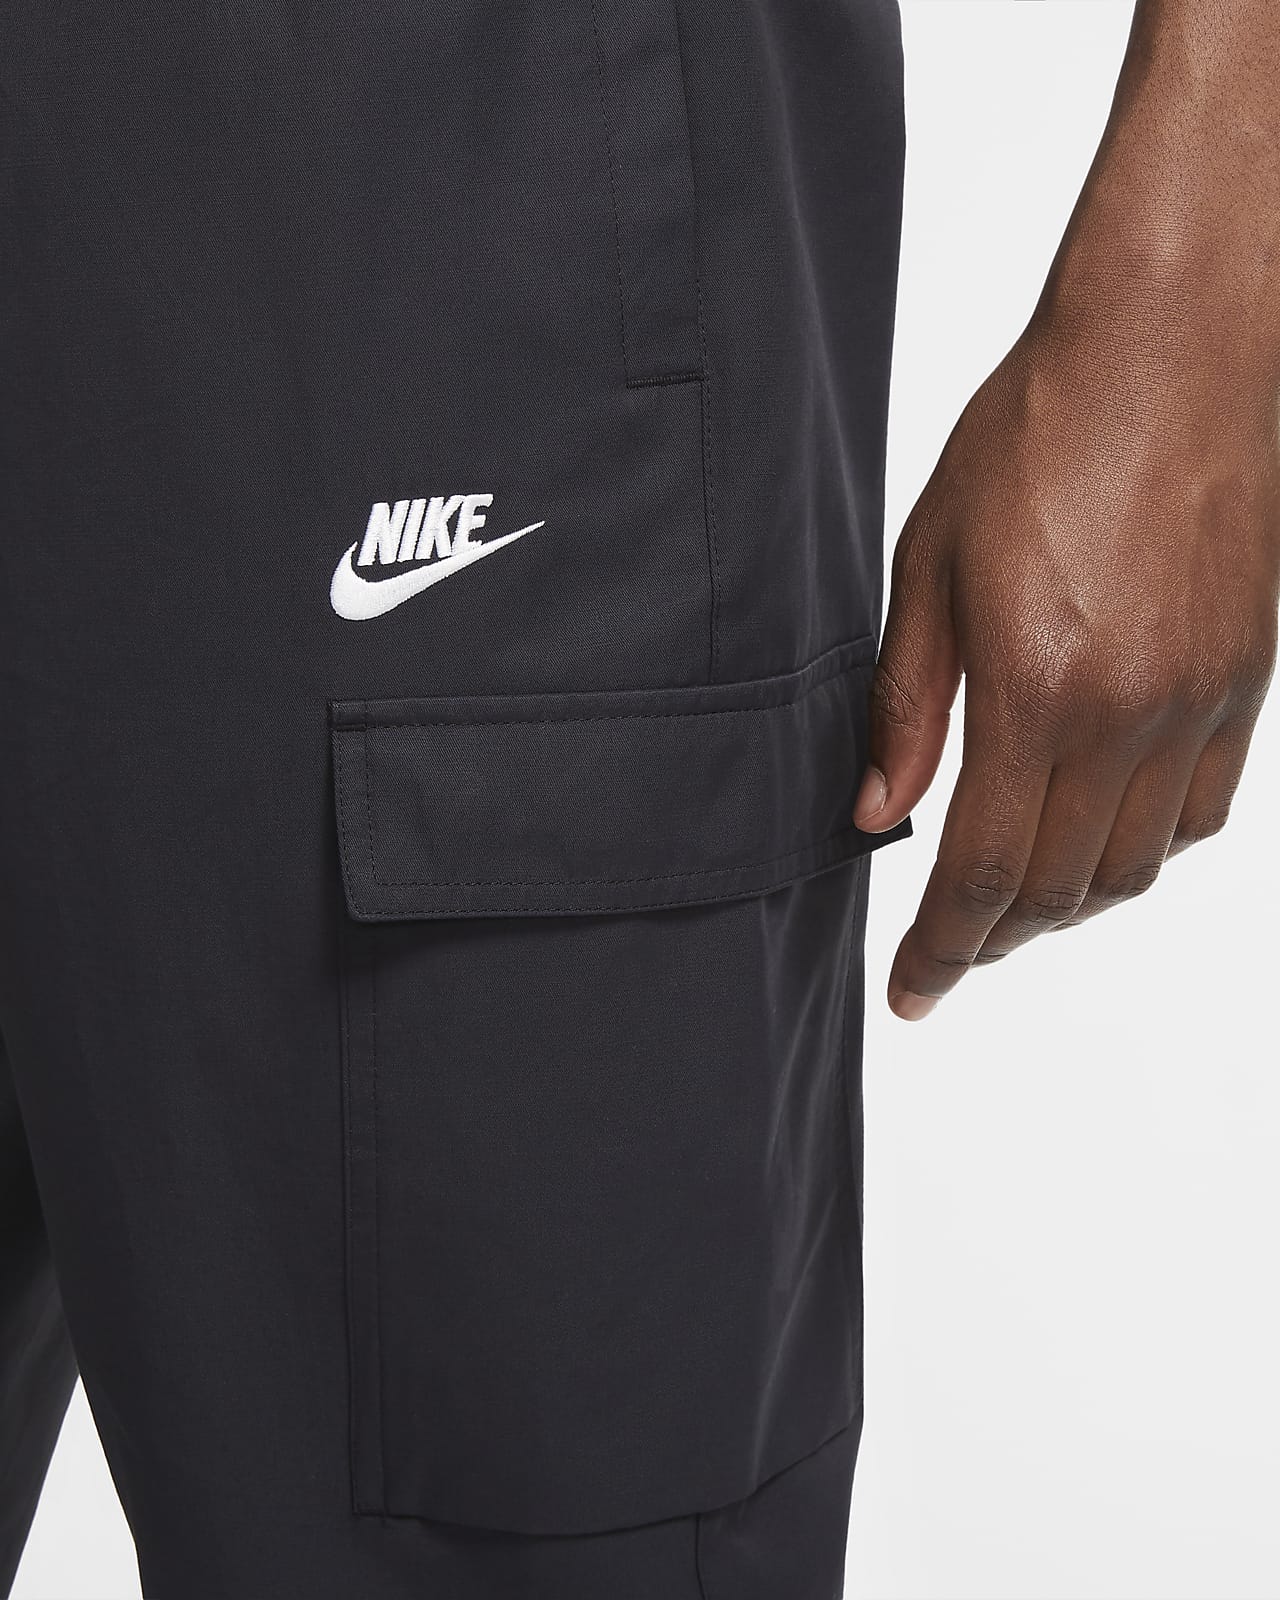 HUGO - Cotton-twill tracksuit bottoms with graffiti-inspired artwork